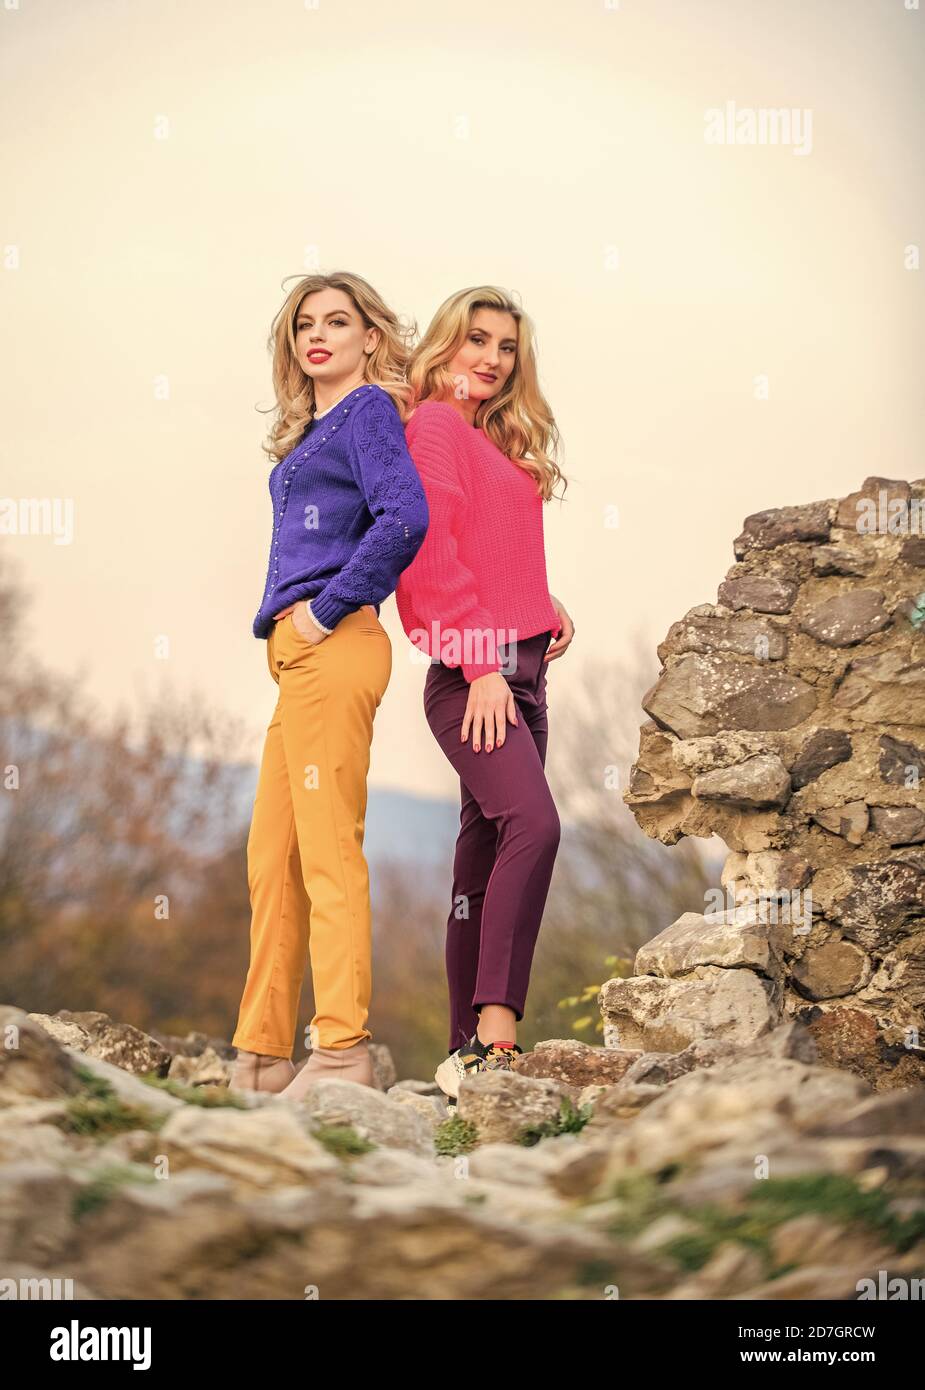 Vivid style concept. Sisters enjoy colorful outfits on gloomy day